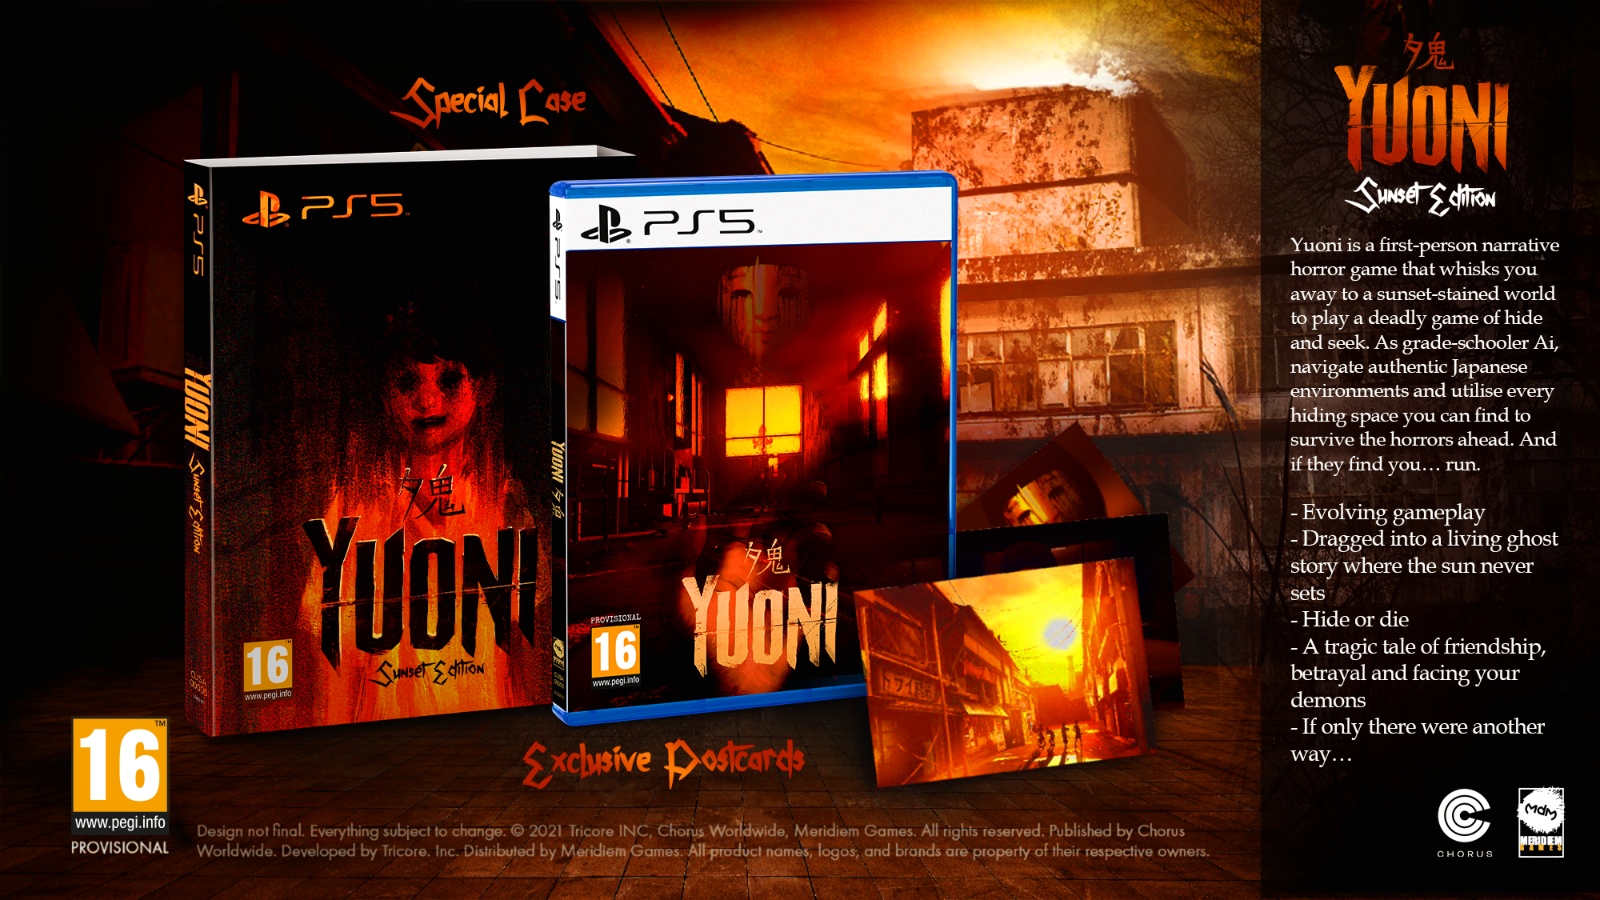 First-Person Horror Game Yuoni To Get Physical Boxed Special Edition